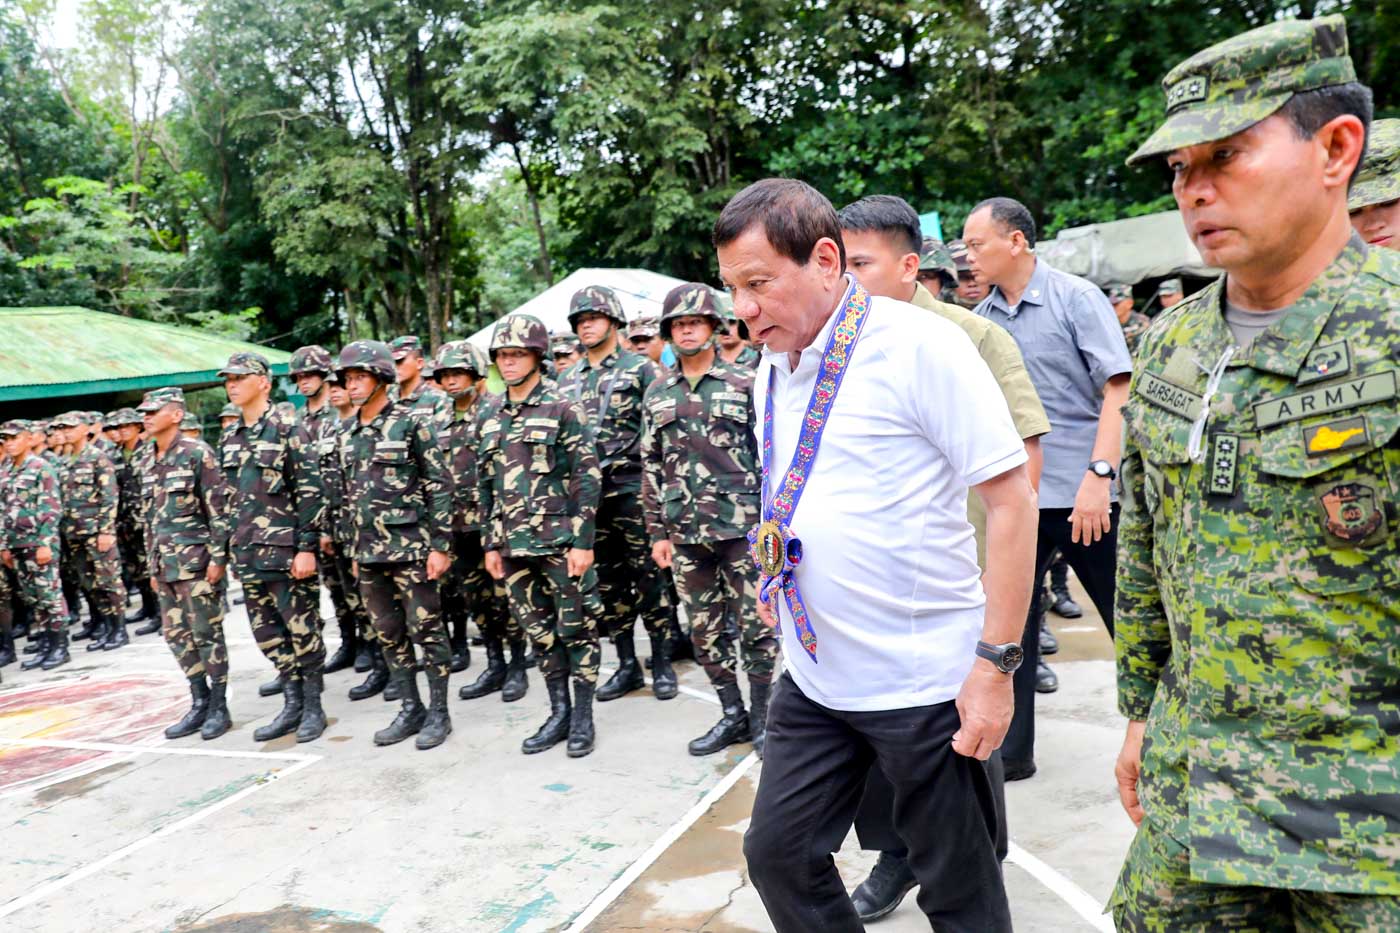 TIMES OF CONFLICT. President Rodrigo Duterte visits a Sultan Kudarat military camp days after the start of Marawi clashes. Presidential photo  